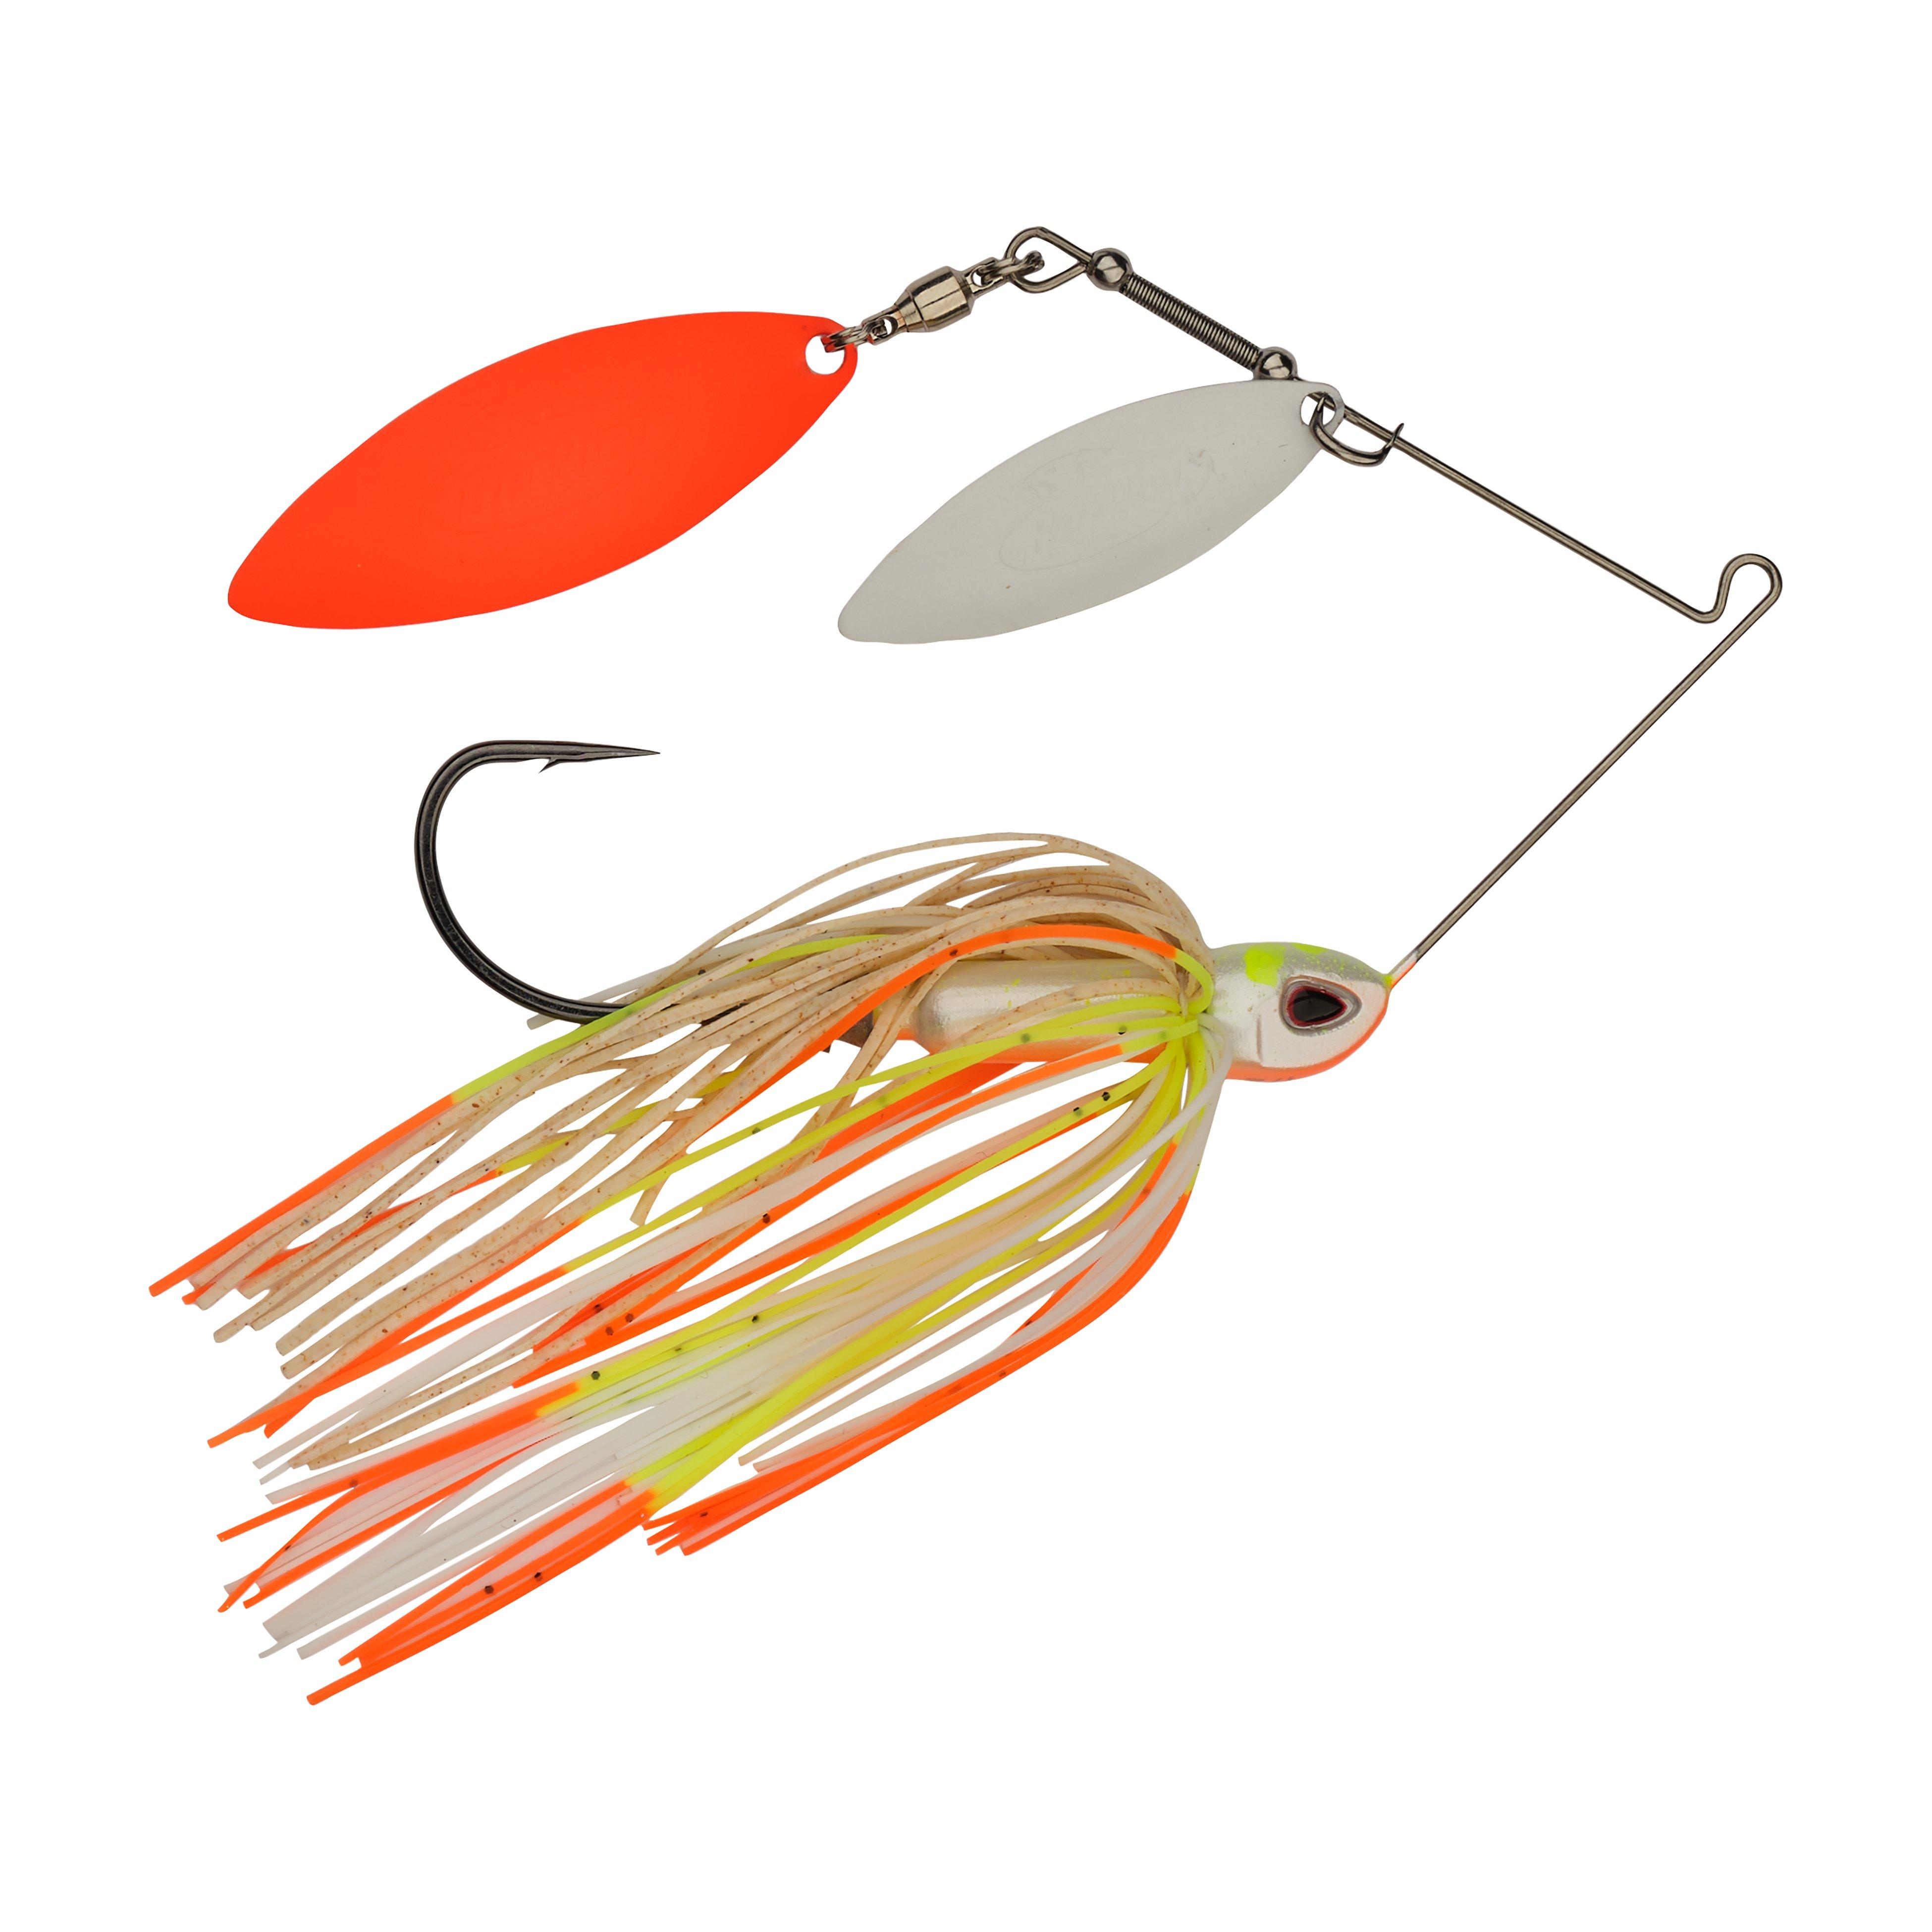 Berkley Power Blade Compact DBL Colorado Spinnerbait Review - Wired2Fish